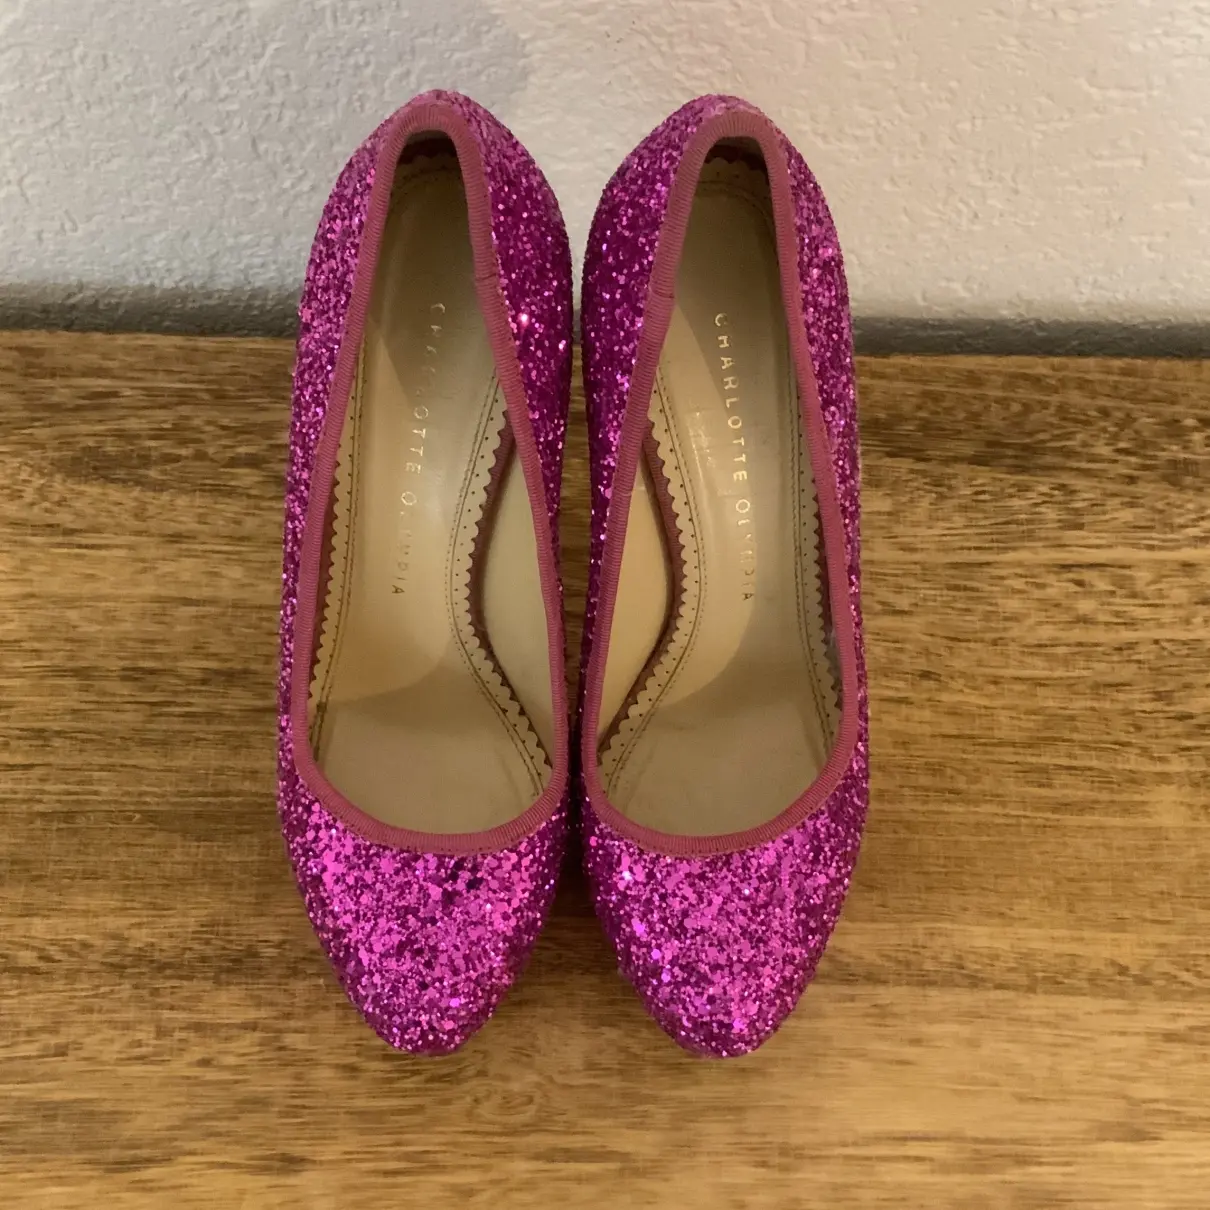 Charlotte Olympia Dolly glitter heels for sale